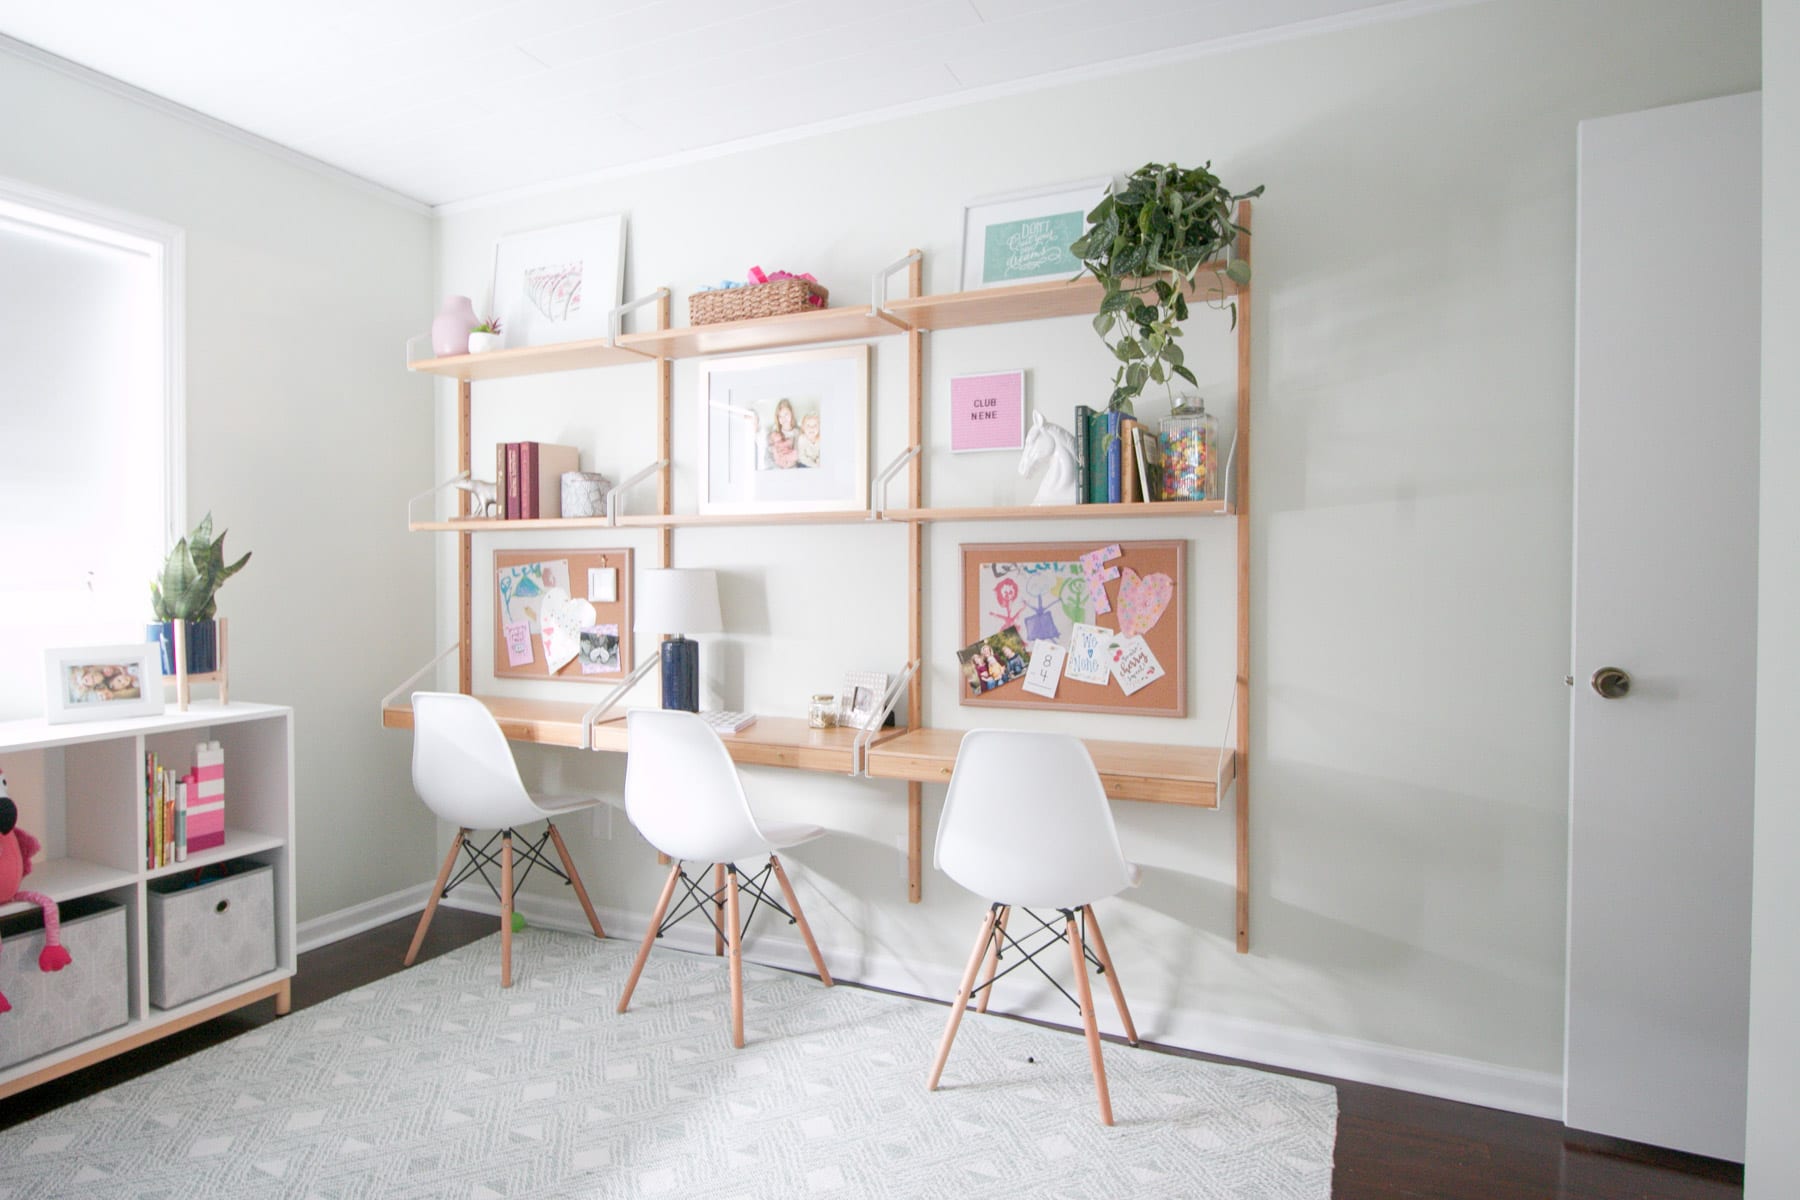 This wall system from Ikea is the perfect way to add 3 desks to this playroom